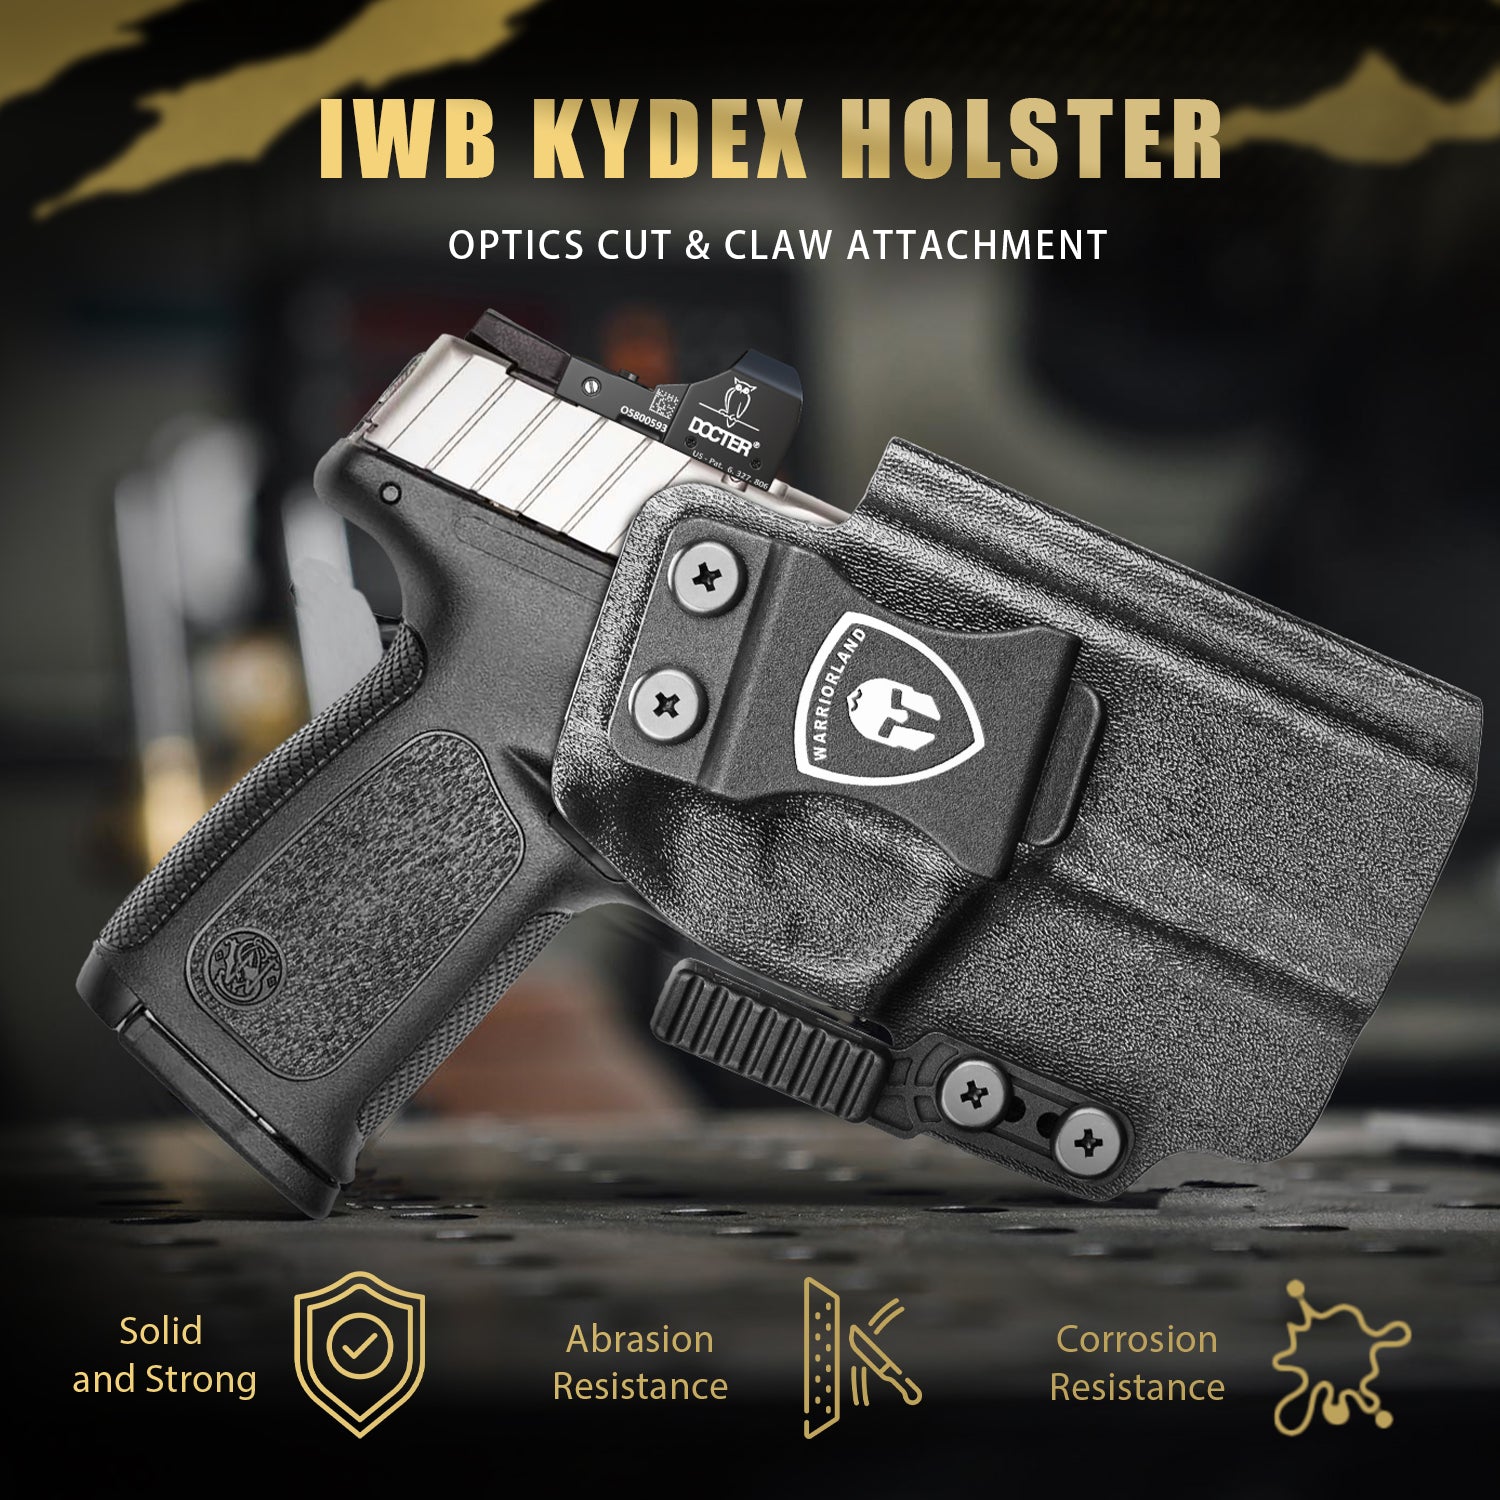 IWB Kydex Holster with Claw Attachment and Optic Cut Fit Smith & Wesson SD9VE & SD40VE Pistol, Inside Waistband Appendix Carry SD9 VE Holster, Adj. Cant & Retention, Right Hand|WARRIORLAND